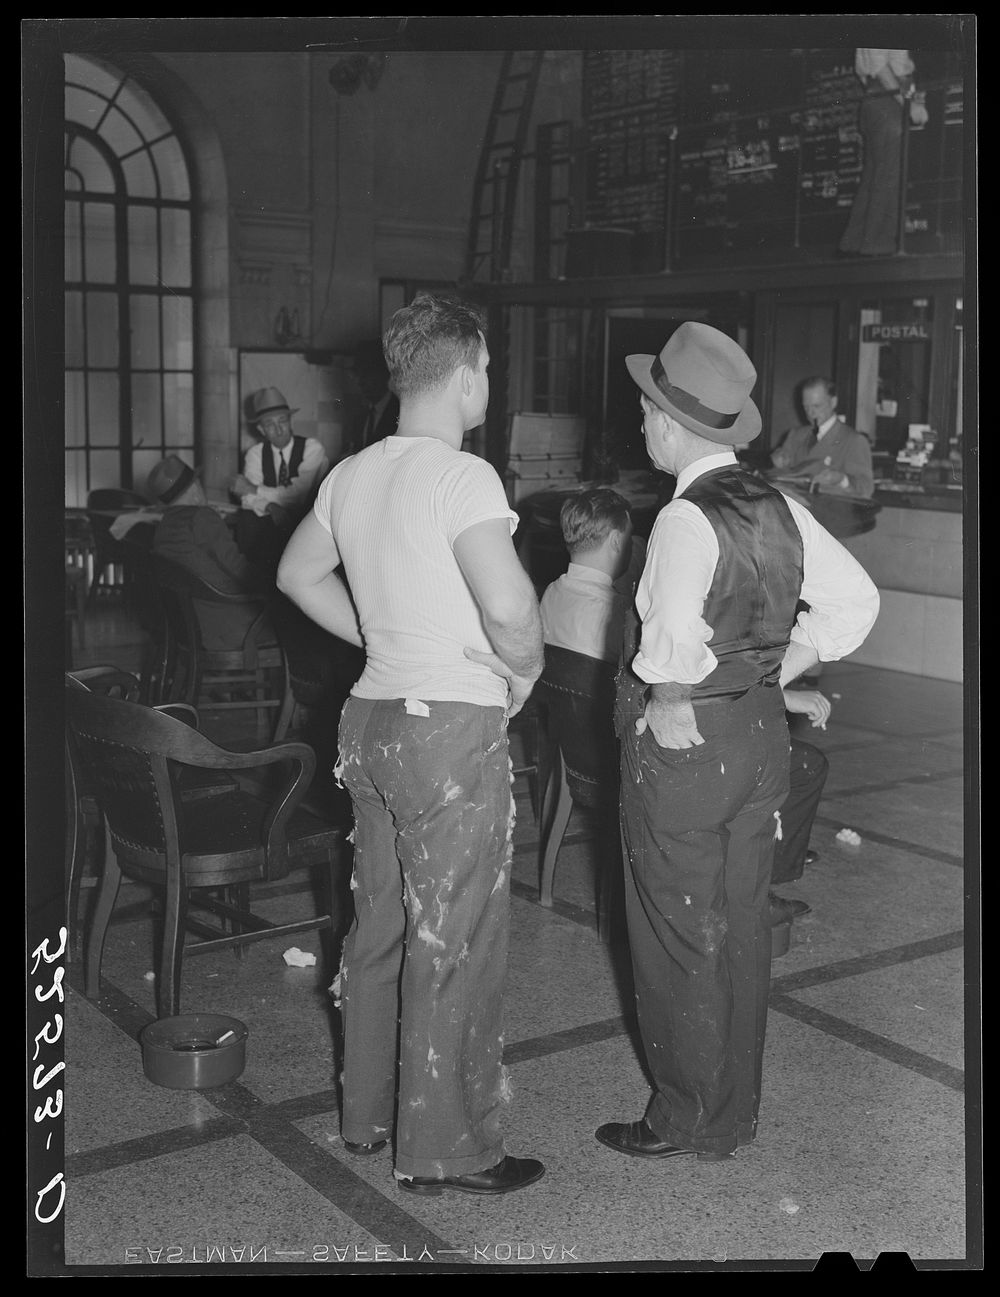 Cotton merchants with cotton lint on suits in Memphis cotton exchange, Tennessee. Sourced from the Library of Congress.